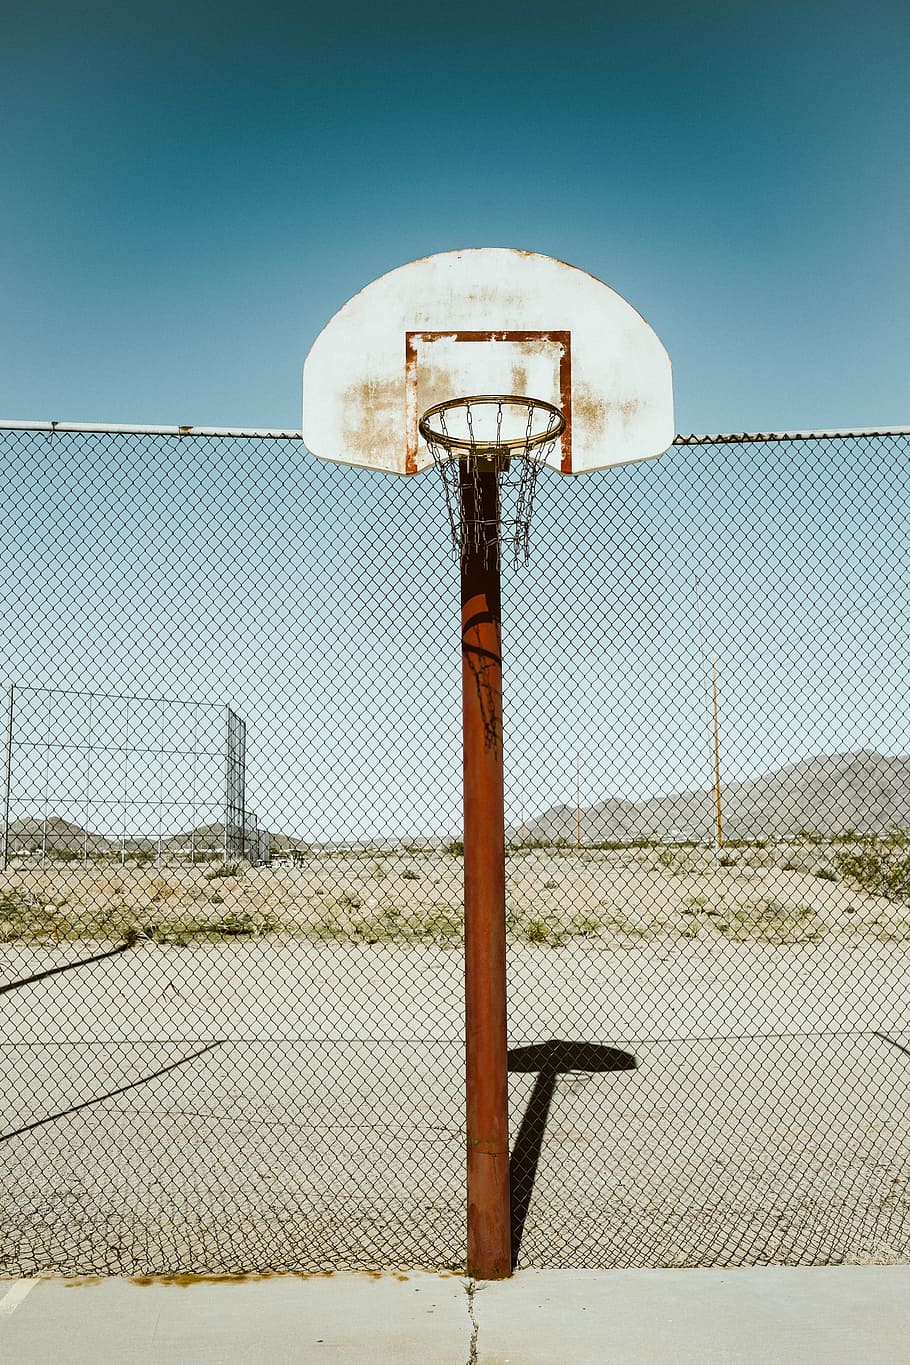 Free download HD wallpaper: white and brown basketball hoop portable